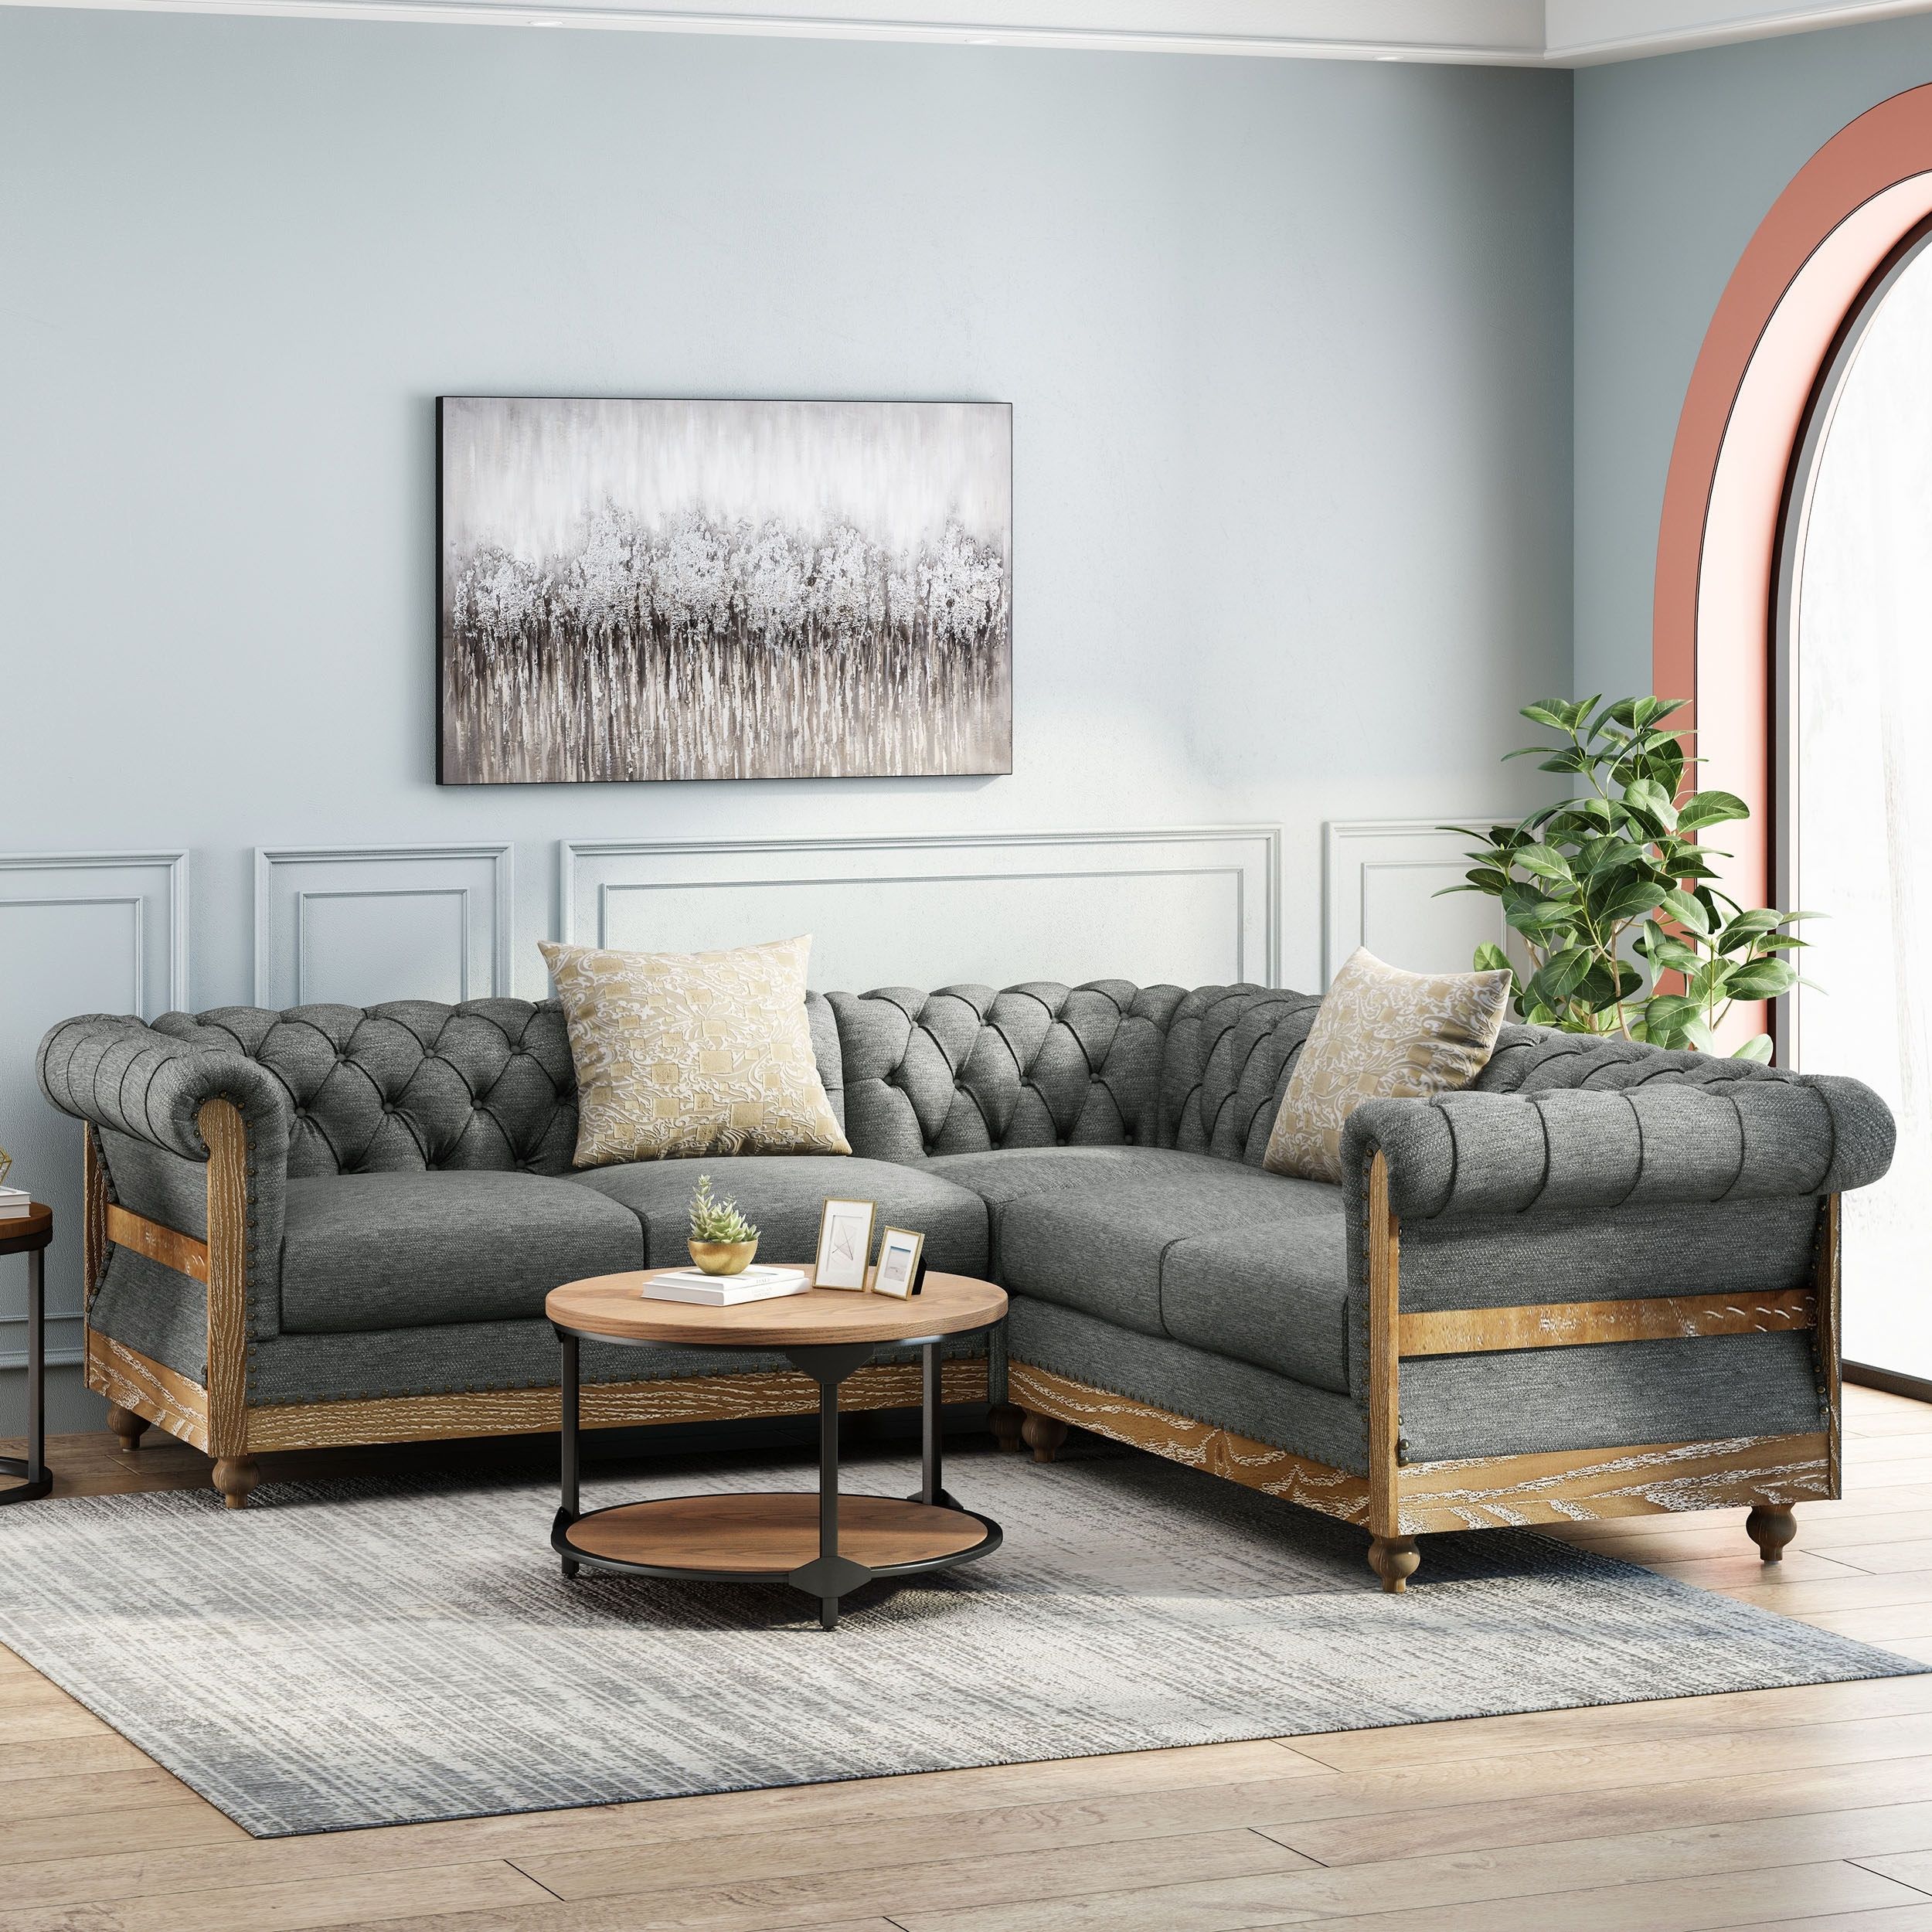 Voll Tufted Sectional Sofa With Nailhead Trimchristopher Knight Home –  On Sale – Bed Bath & Beyond – 34155767 Pertaining To Sofas With Nailhead Trim (View 15 of 15)